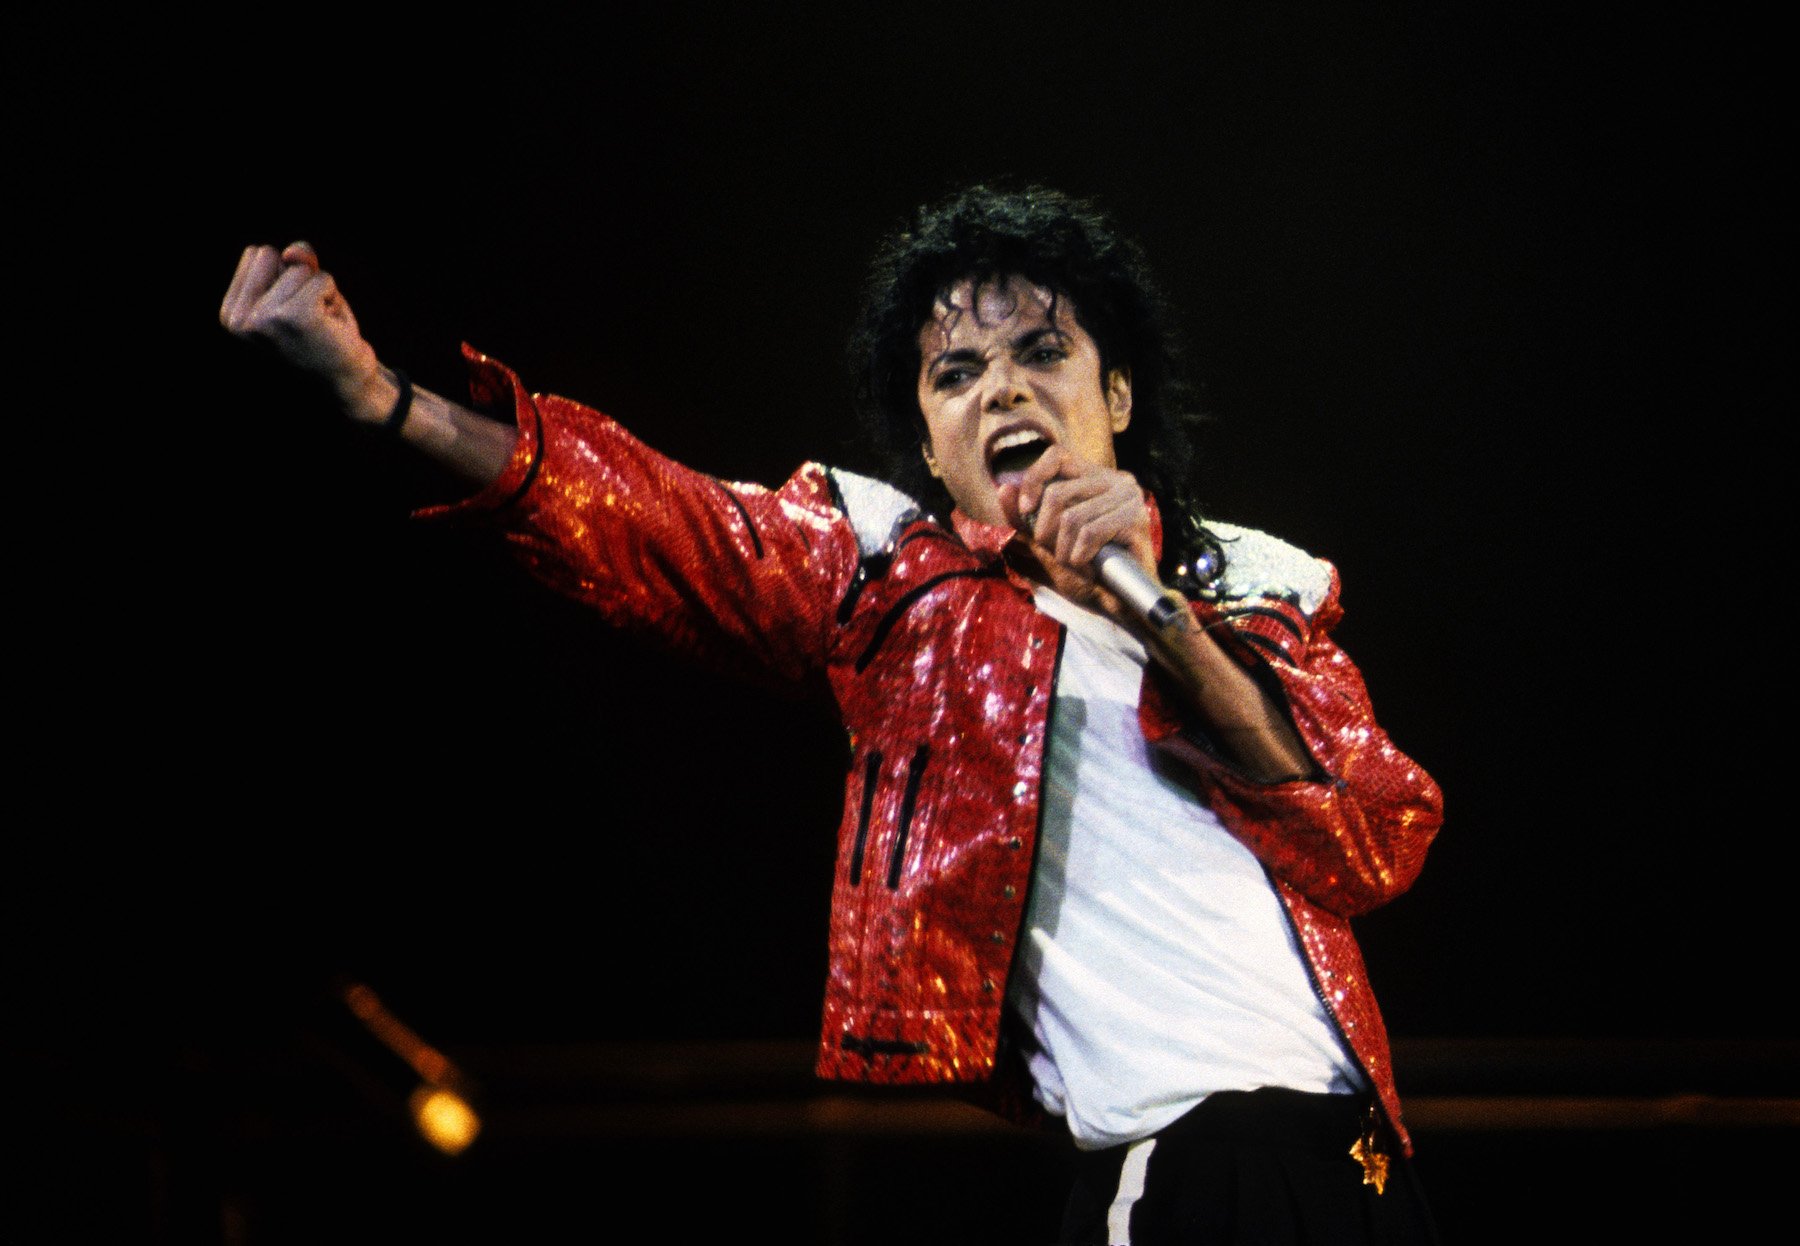 Michael Jackson’s Nephew Will Play the Music Icon in a New Biopic